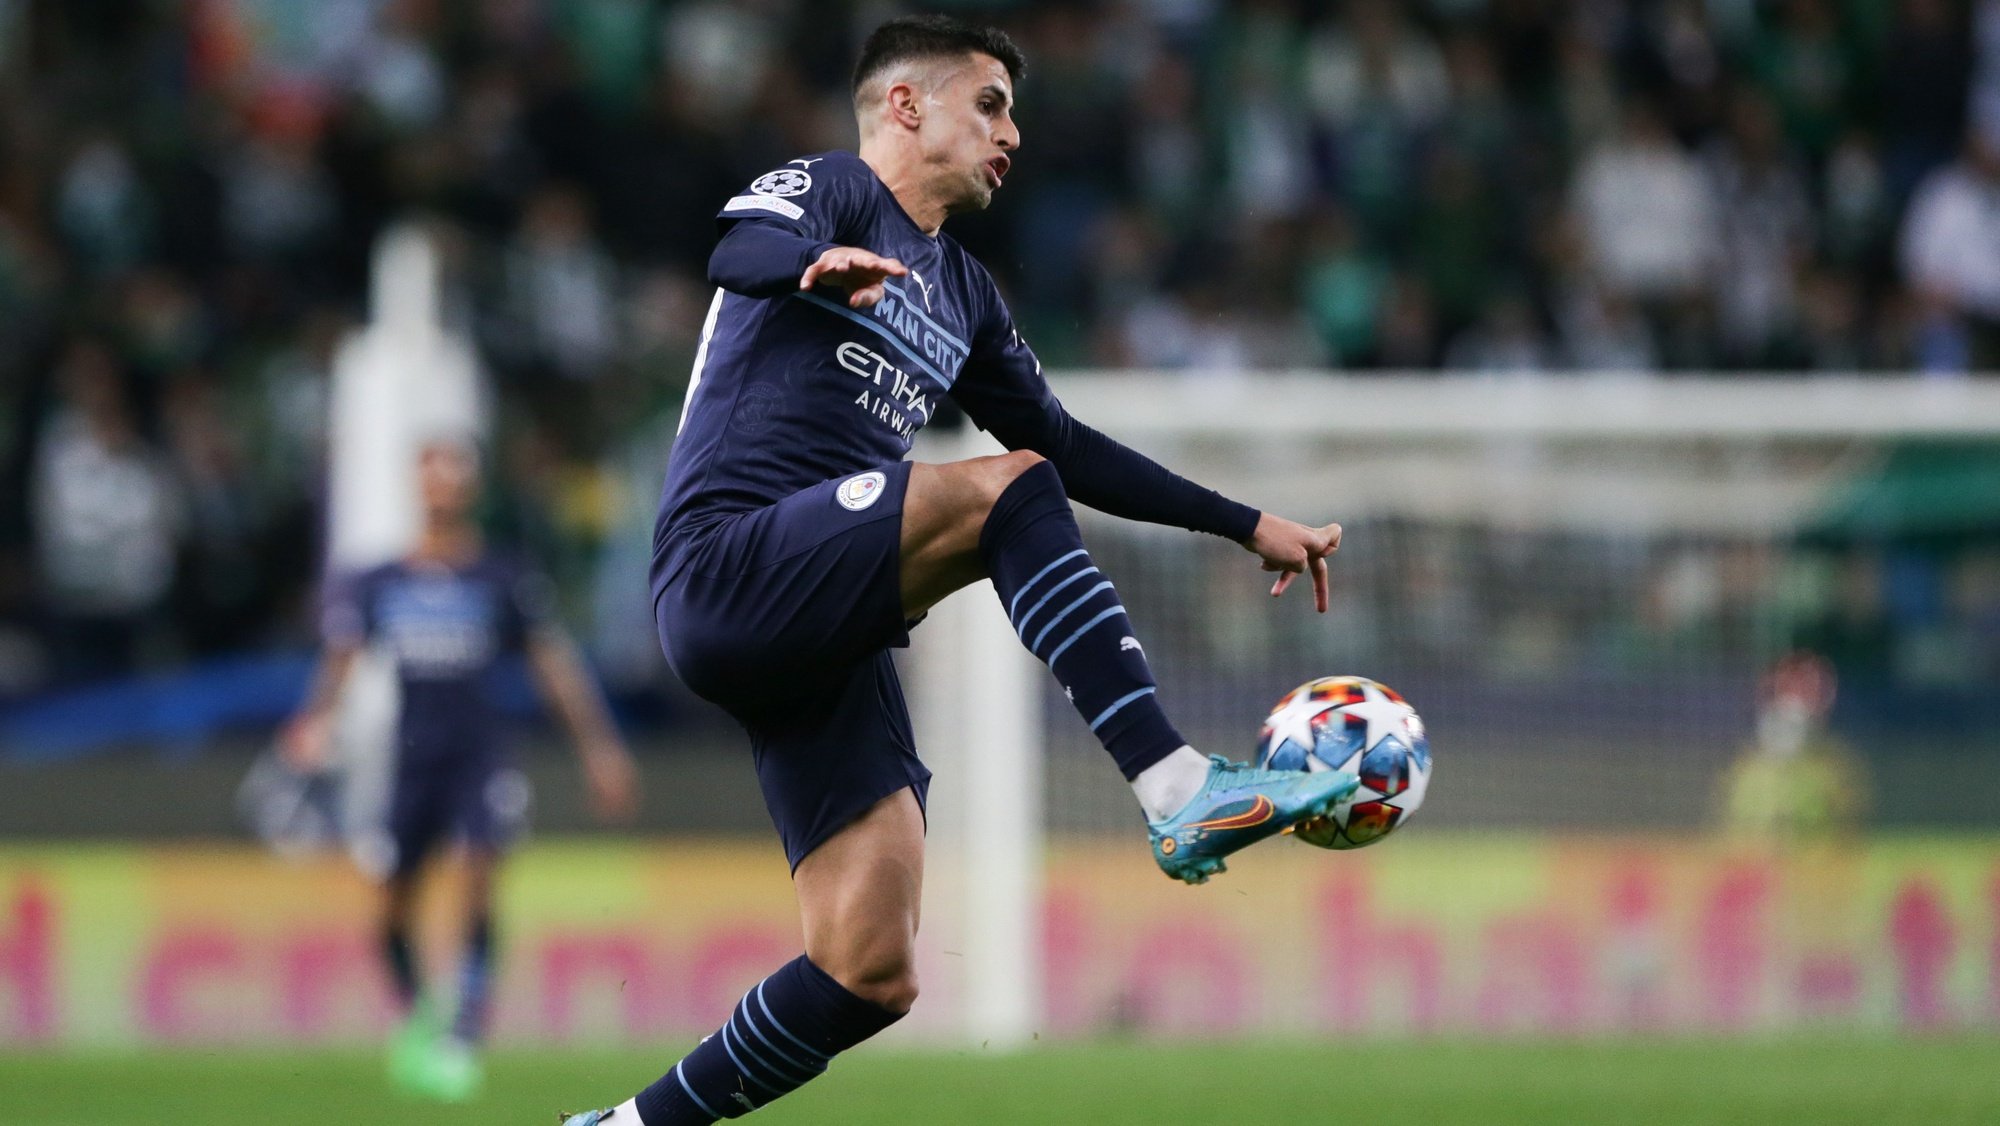 Manchester City player Joao Cancelo in action during their UEFA Champions League quarter finals first leg soccer match against Sporting at Alvalade Stadium in Lisbon, Portugal, 15 de February 2022. TIAGO PETINGA/LUSA